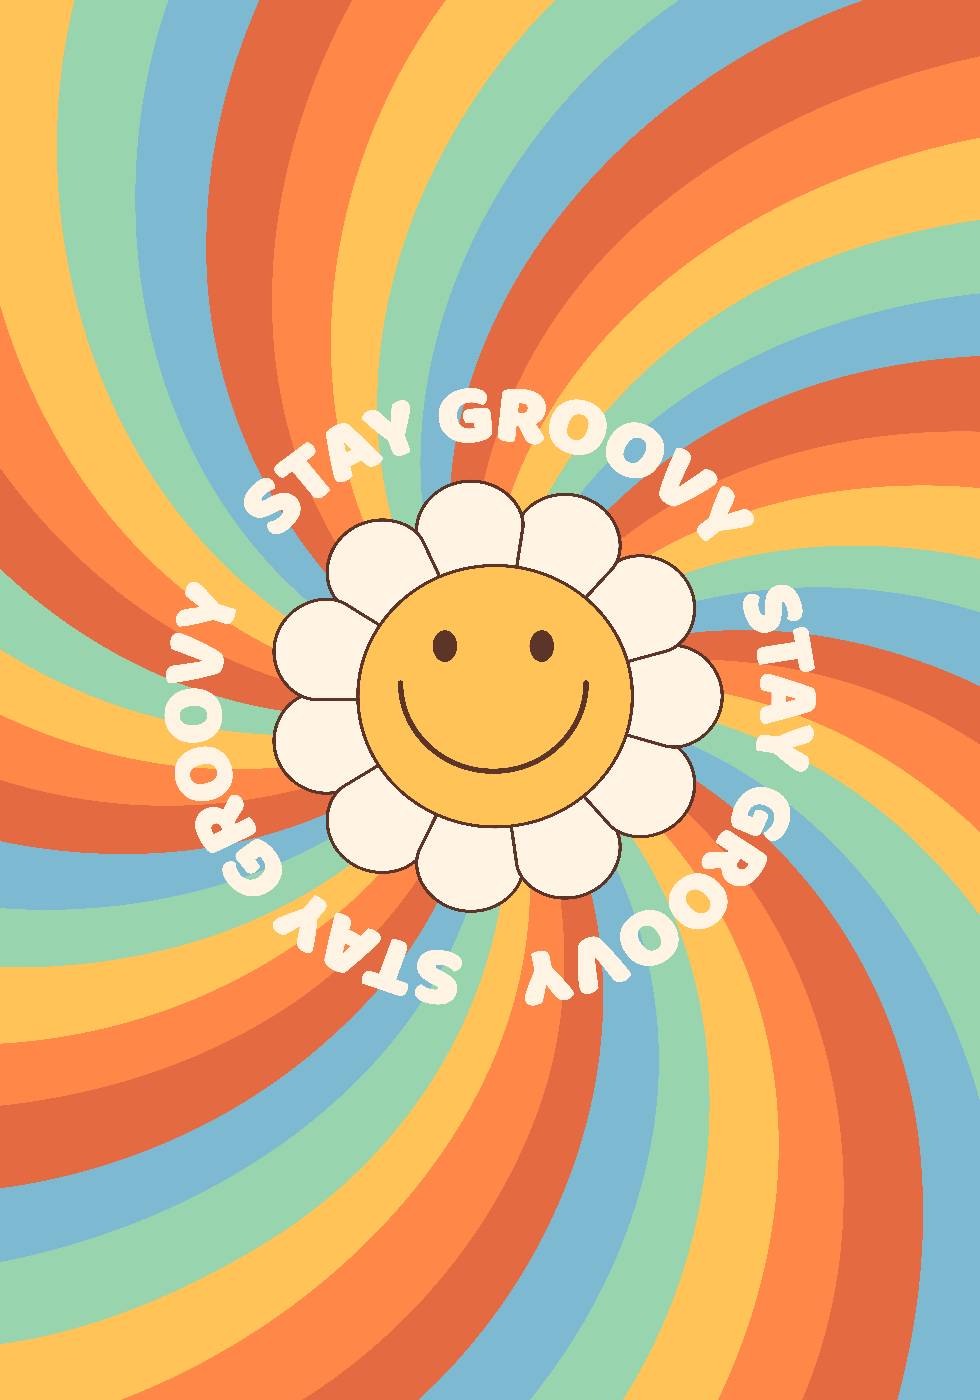 Stay Groovy Poster